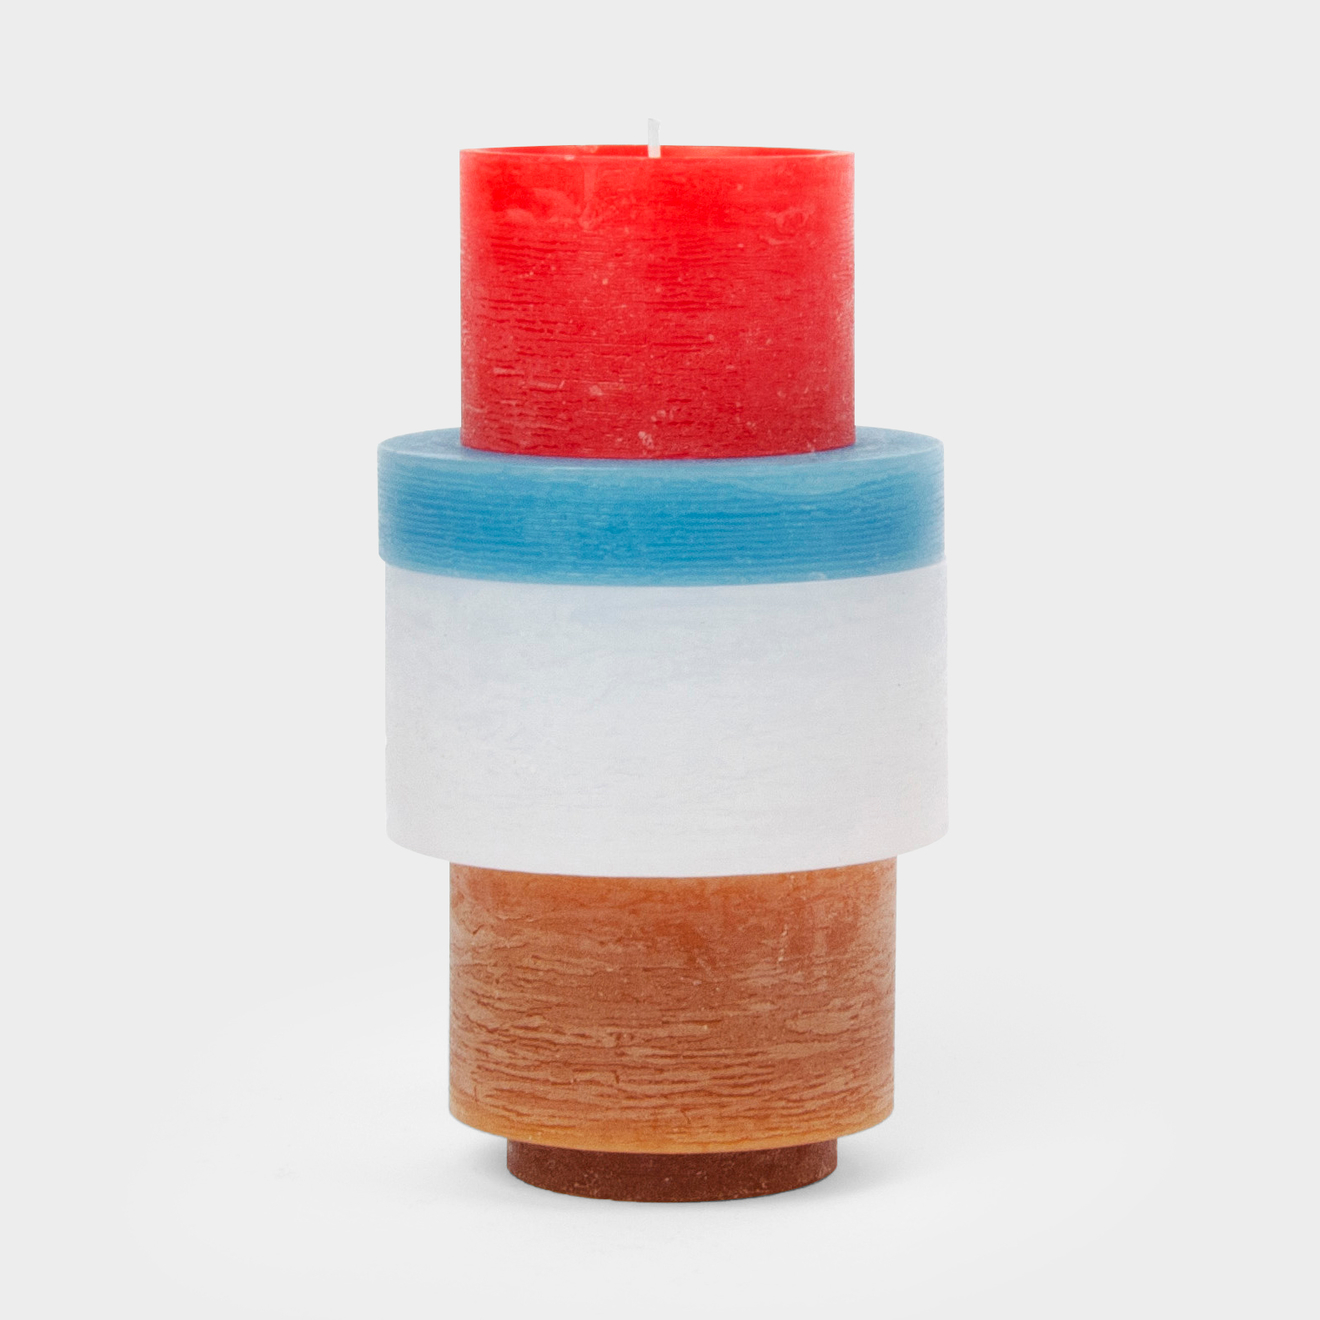 Stan Editions - Candl Stacks - Stack 05